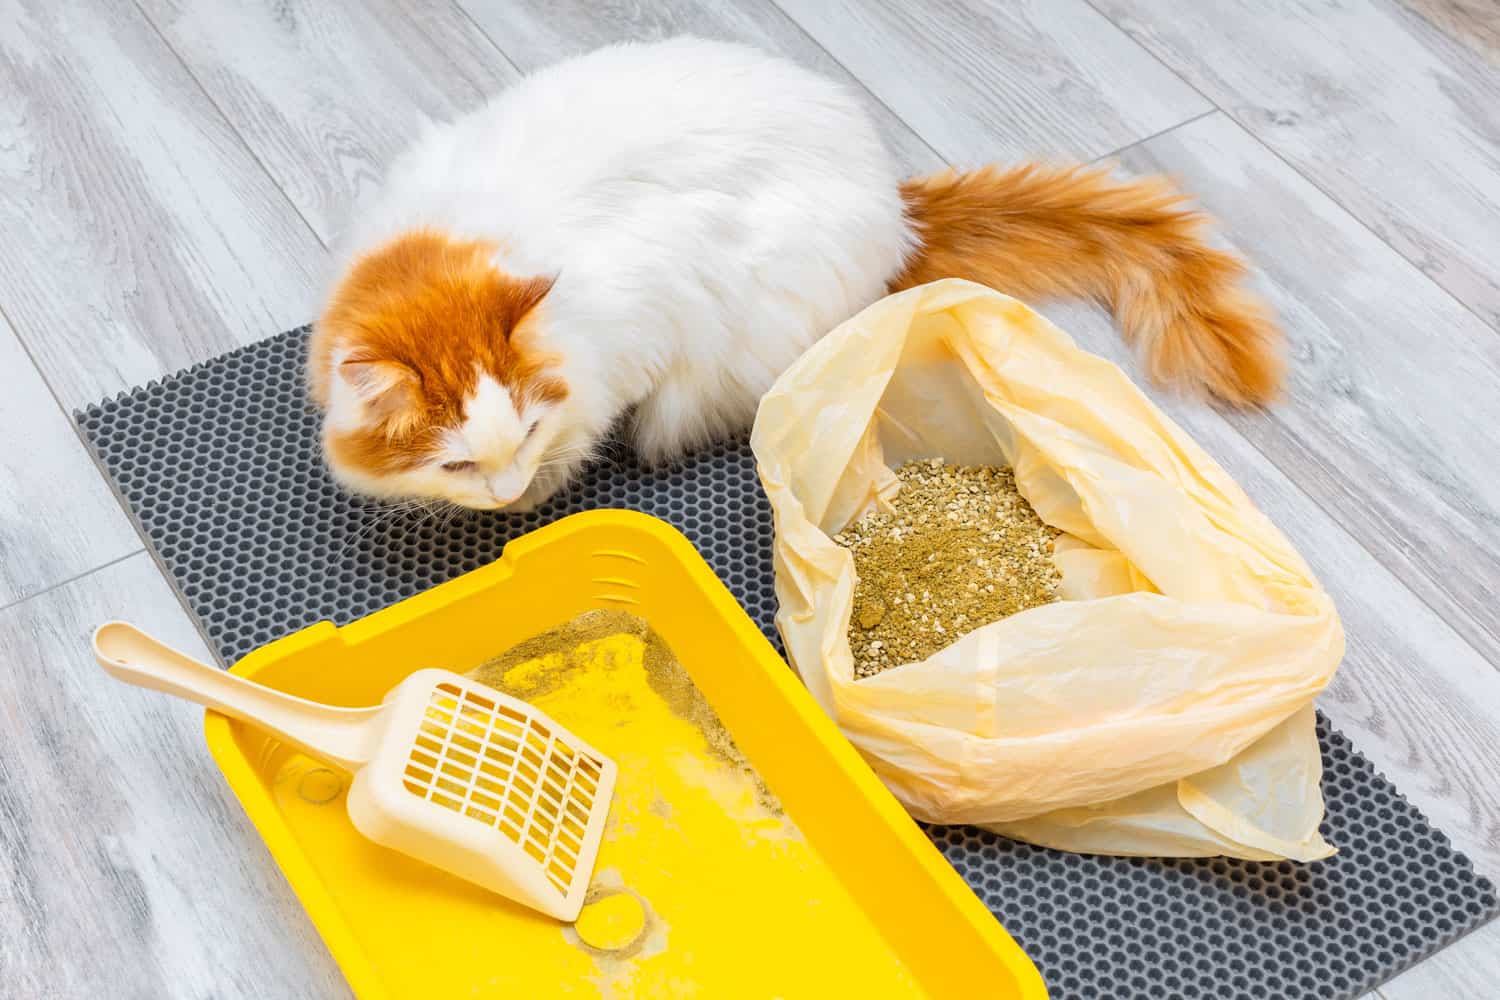 replacing dry litter in a cat litter box. cleaning up used cat litter. cat watching cat litter cleaning. High quality photo clumping and non-clumping
